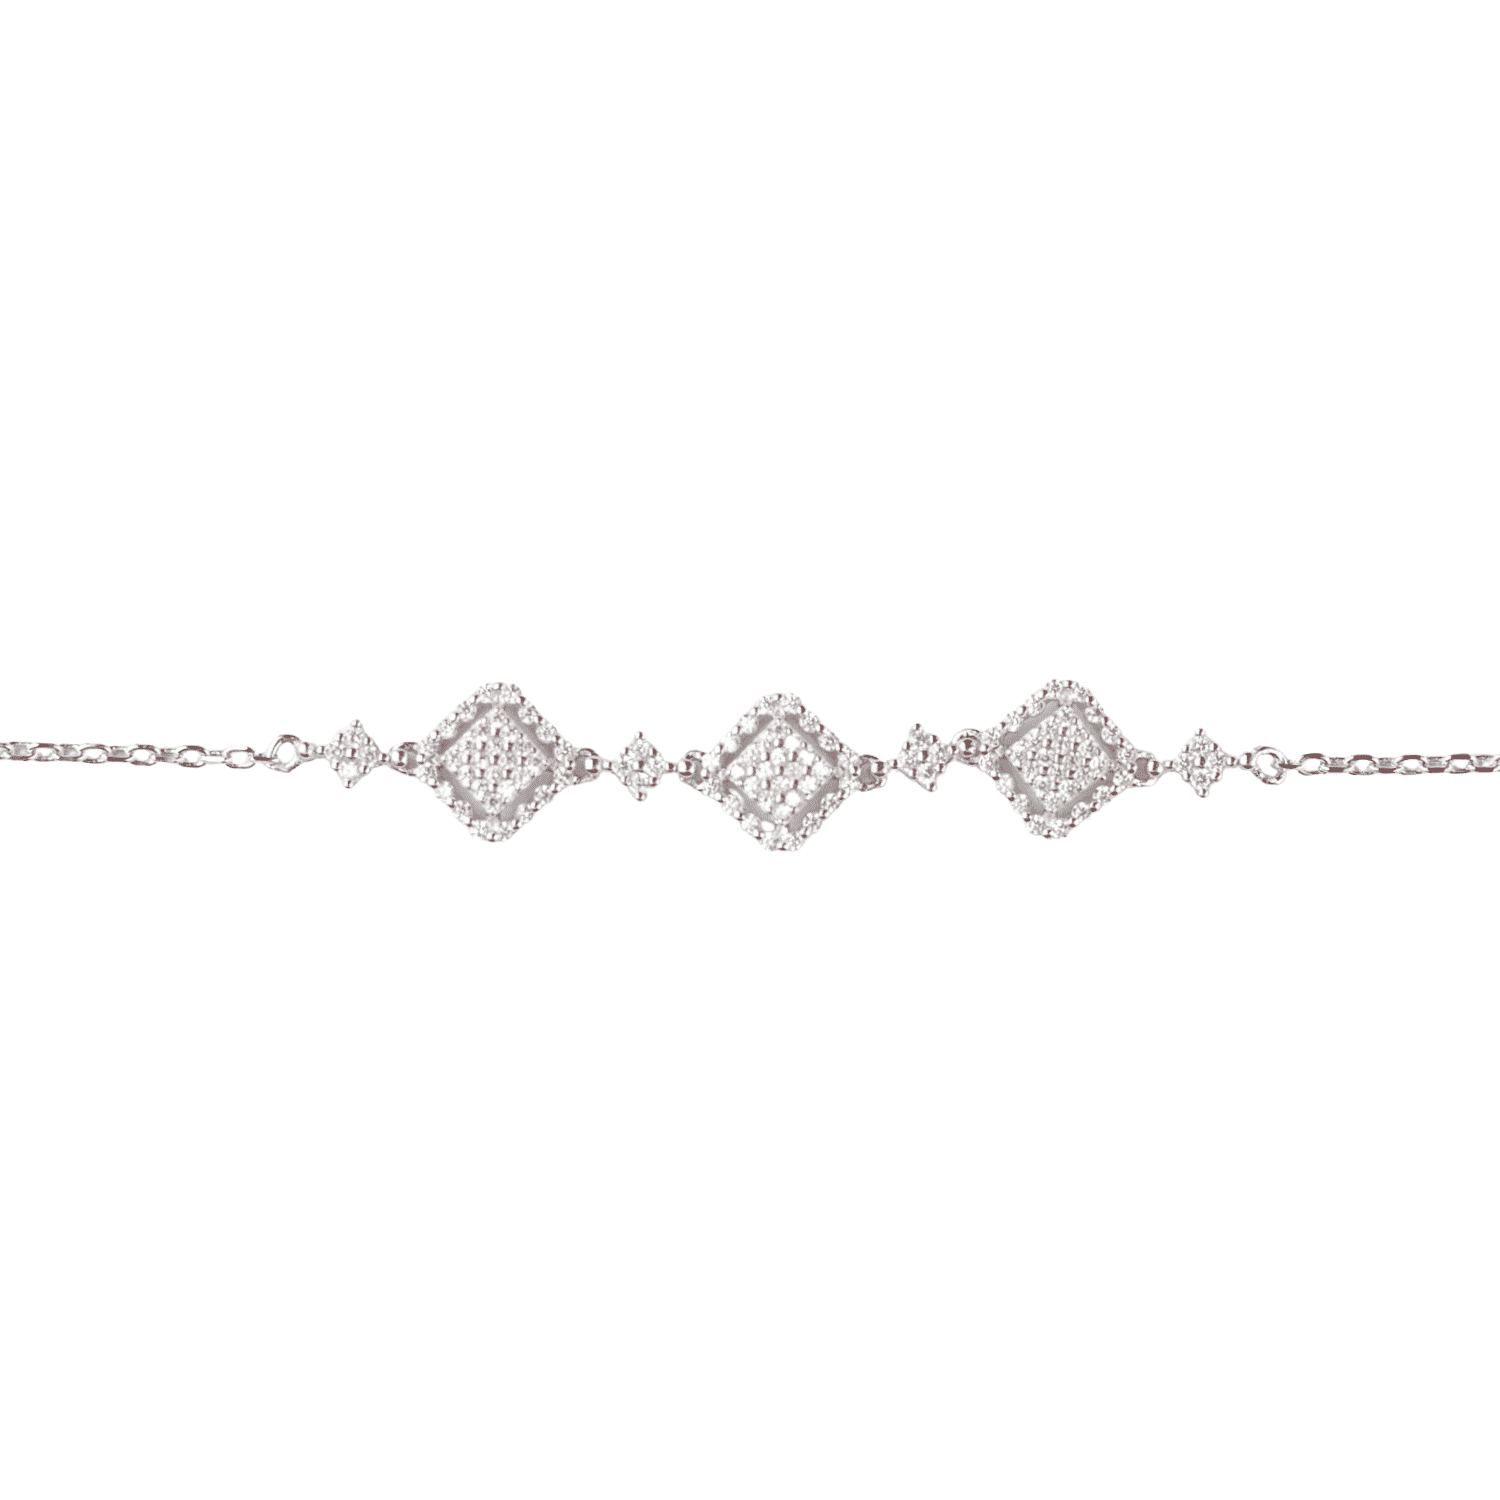 Asfour Zircon Rounded Shape 925 Sterling Silver Braclet,Clear